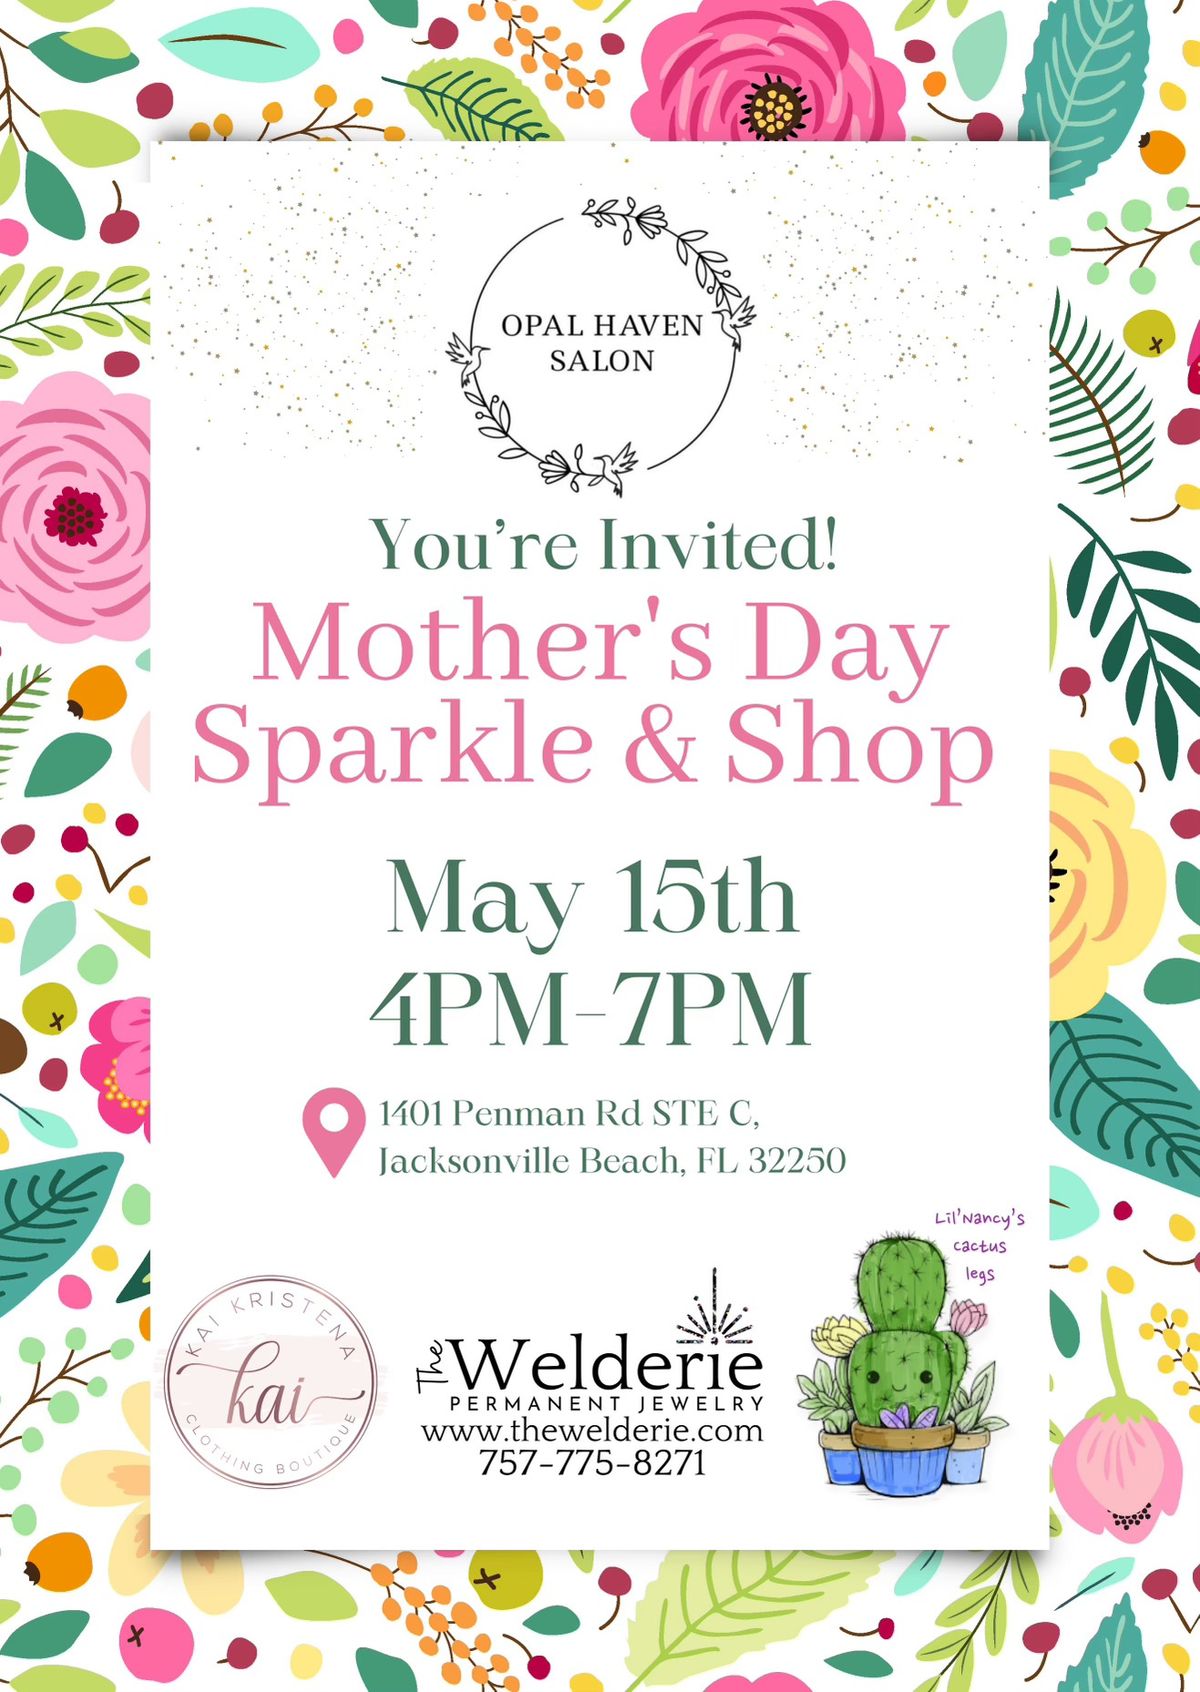 Mothers Day Sparkle & Shop